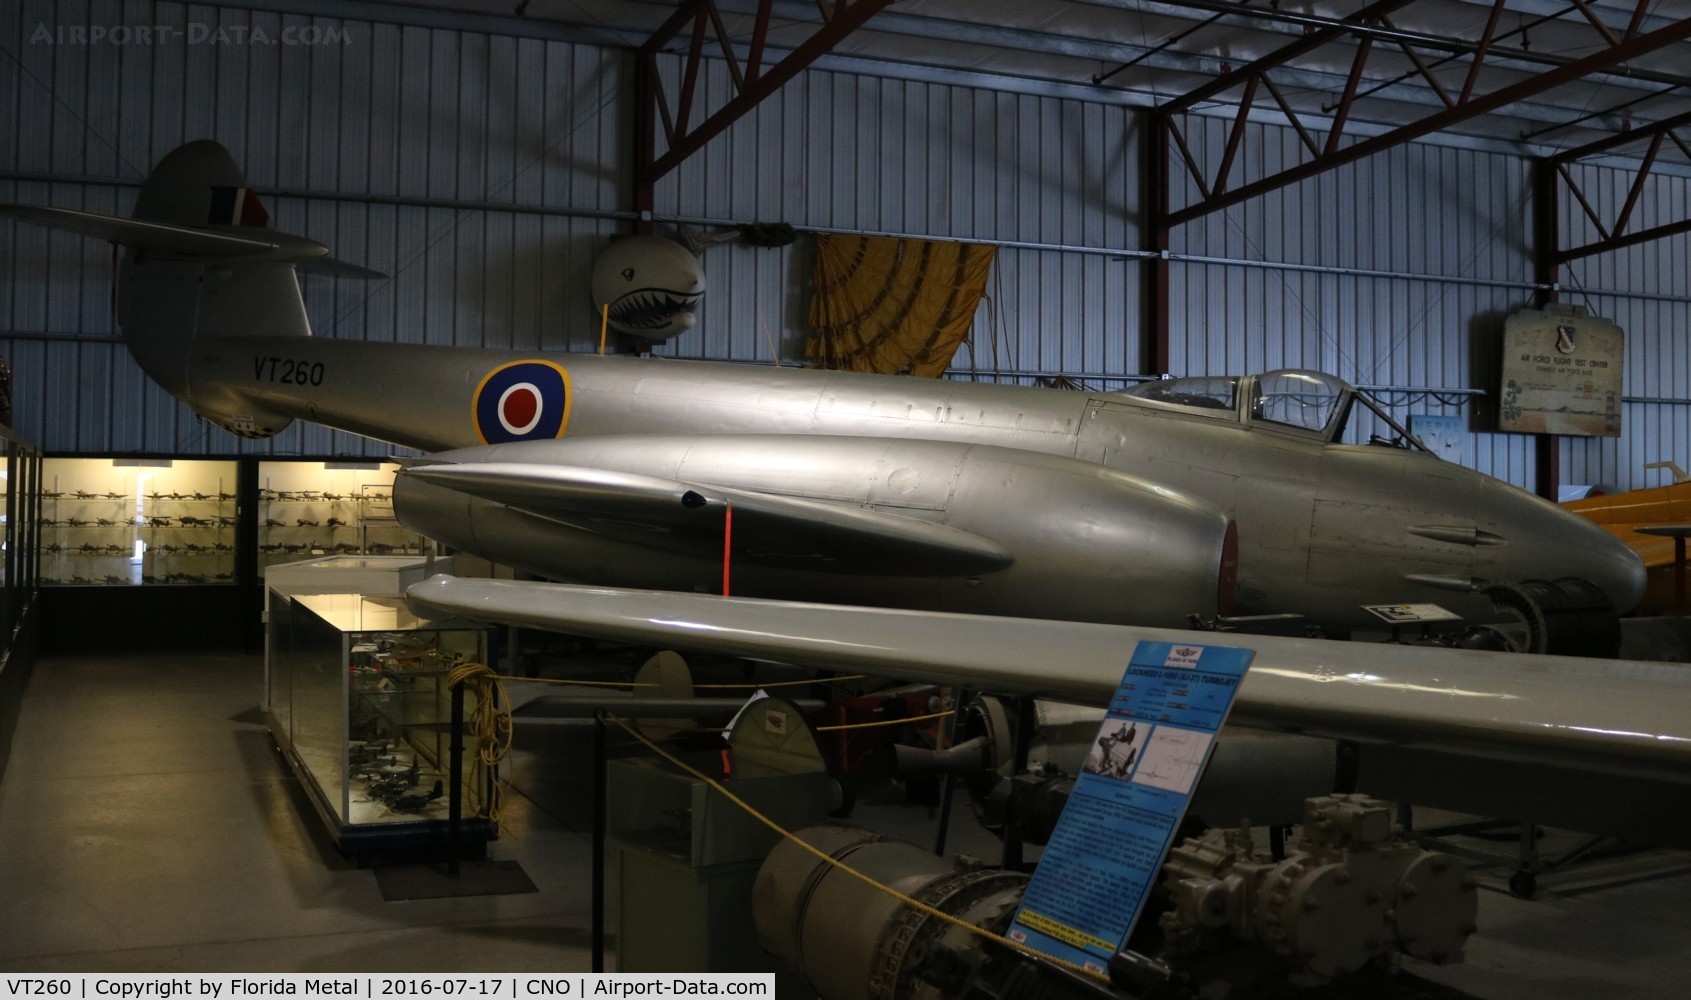 VT260, Gloster Meteor F.4 C/N Not found VT260, Gloster Meteor F.4.